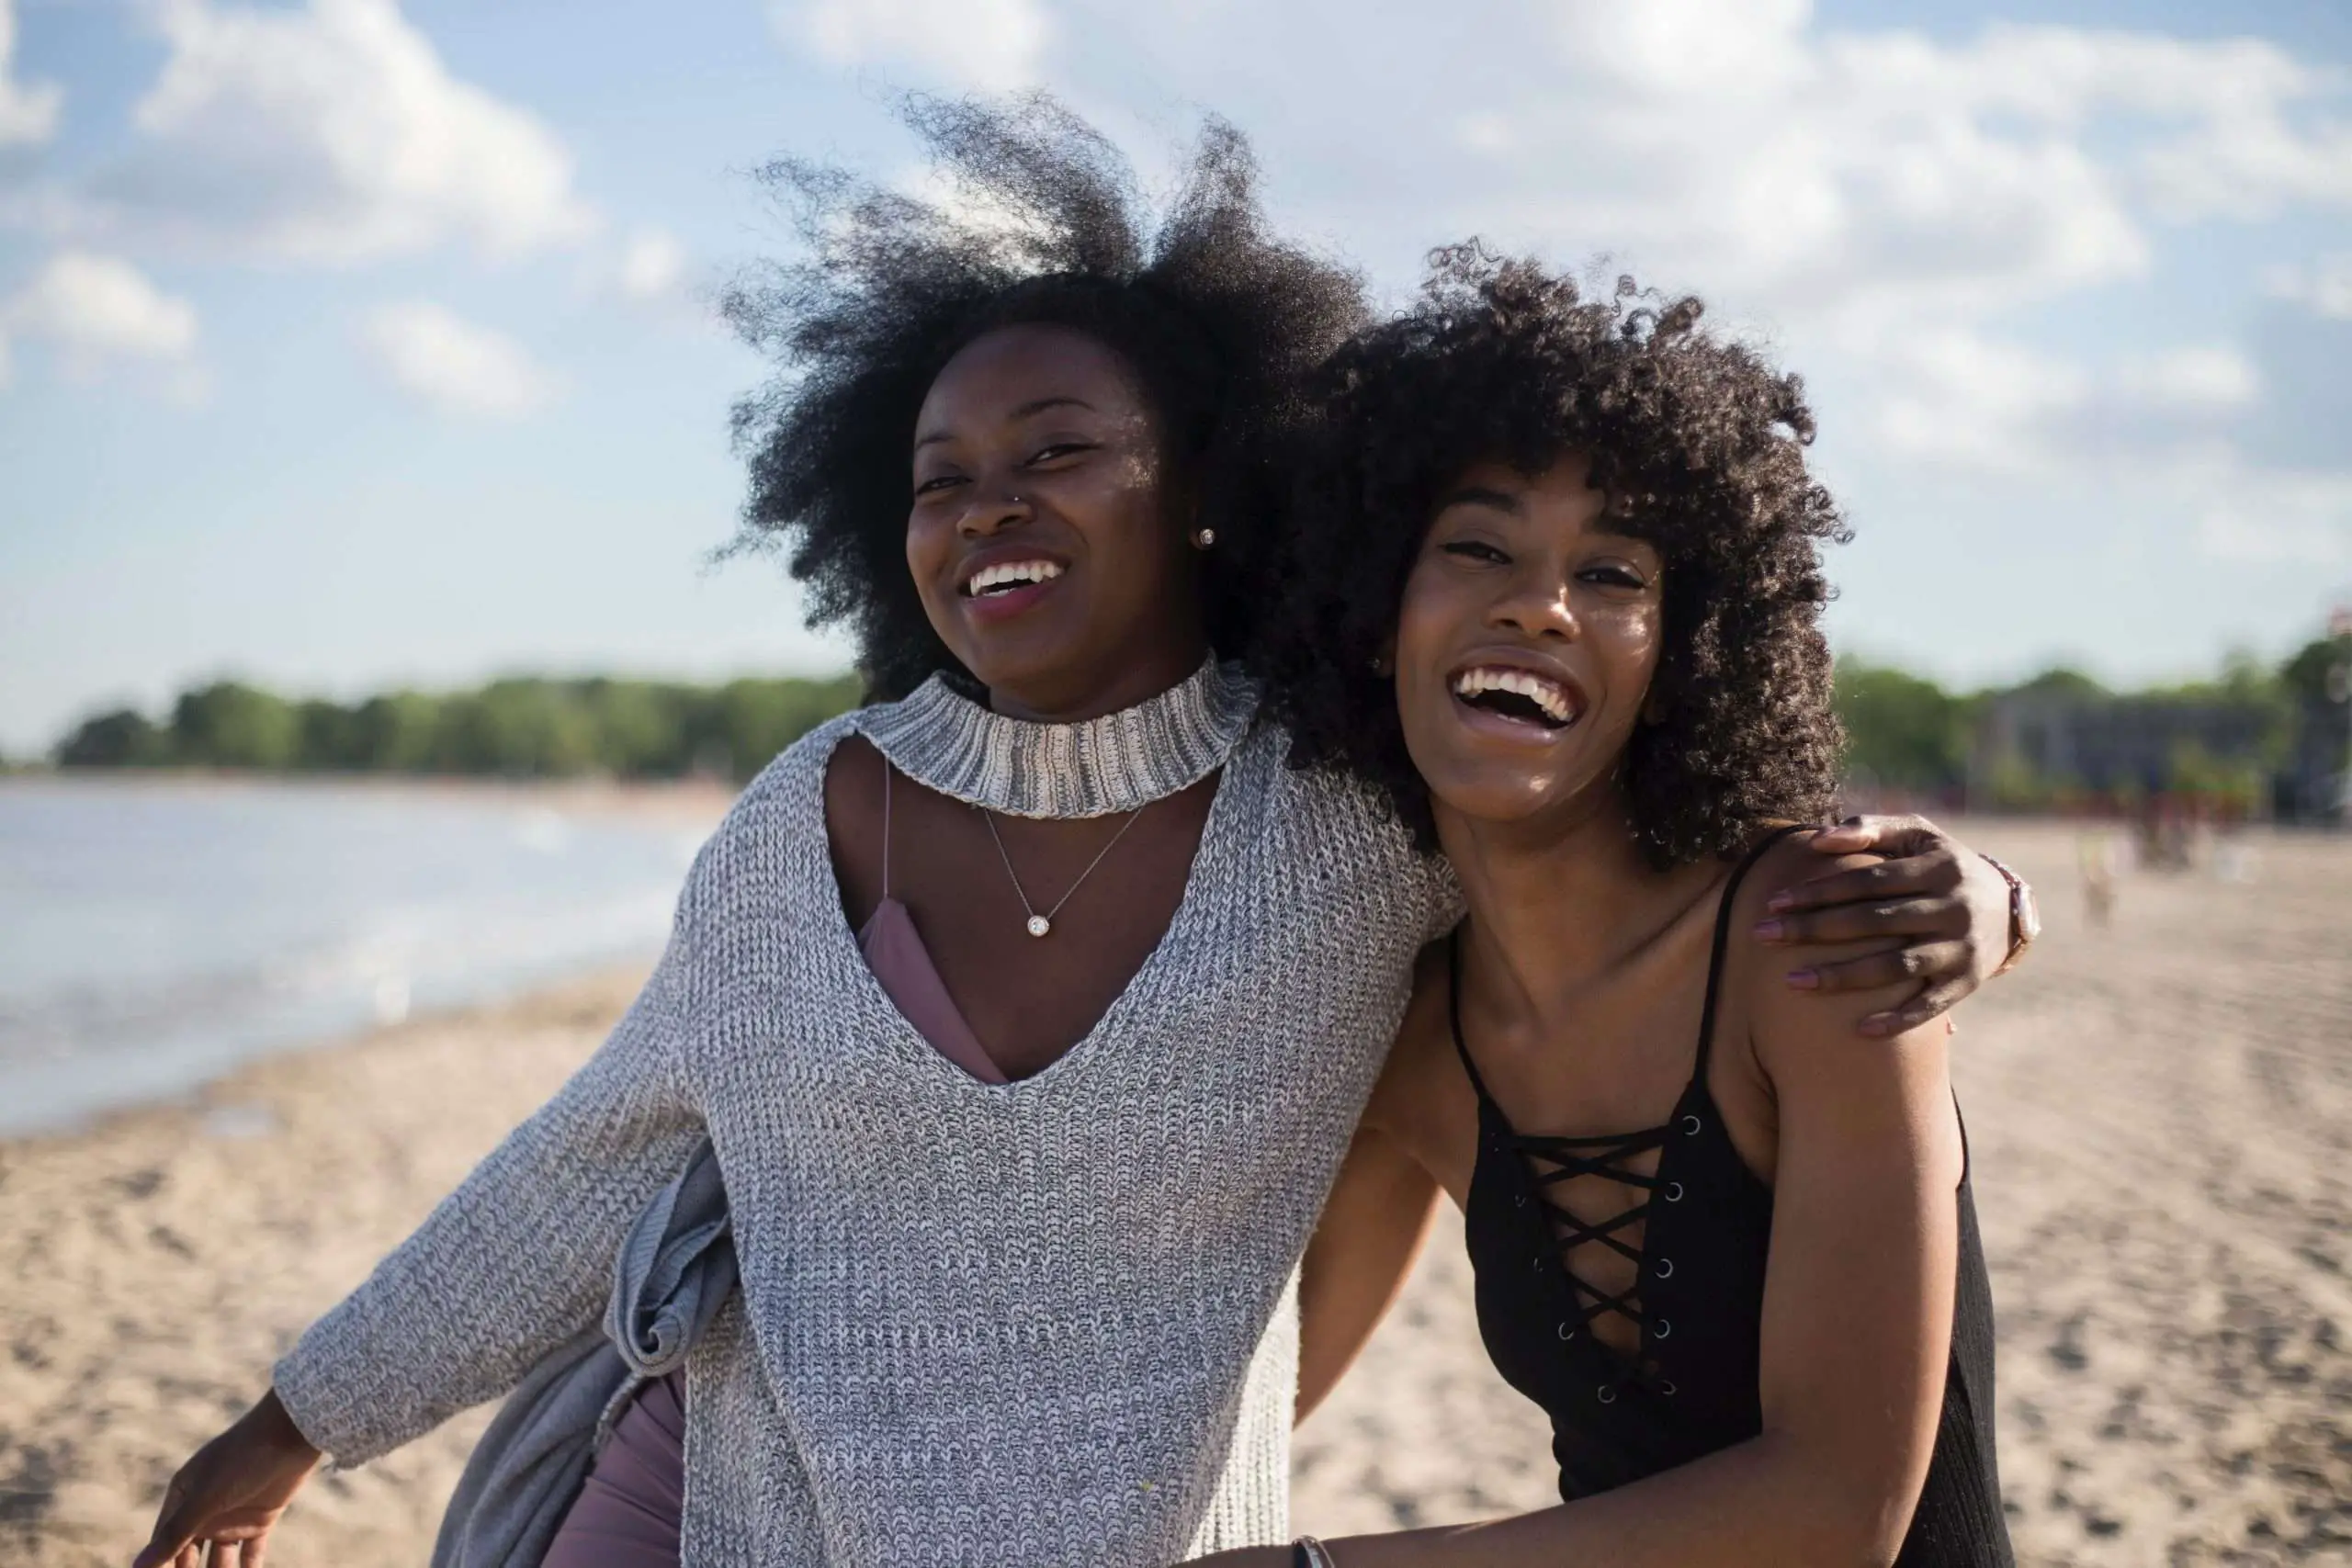 two black girlfriends on the beach on vacation laughing and having a great time. One is wearing grey and the other is black. Both with Afro